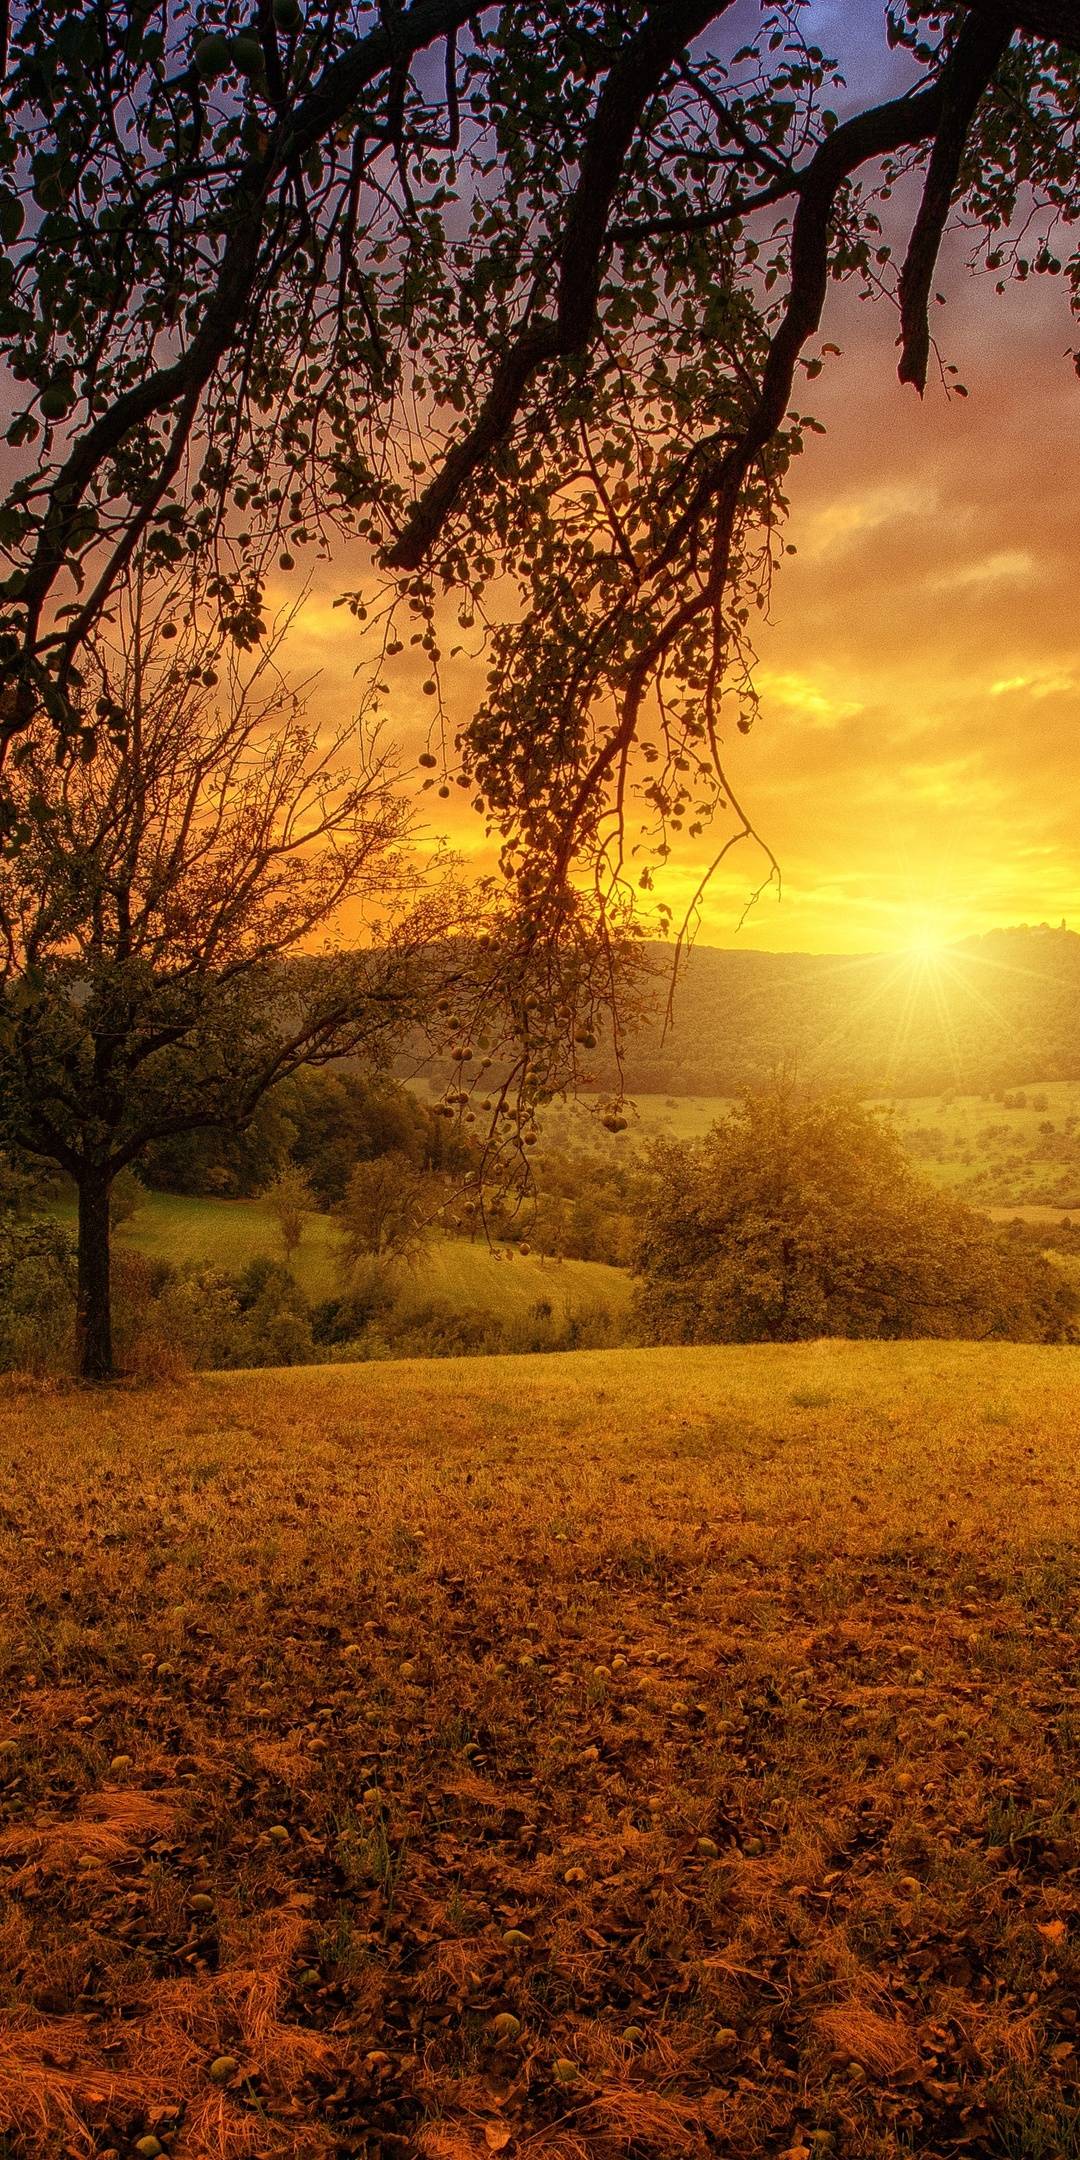 A sunset over the fields and trees - Sun, landscape